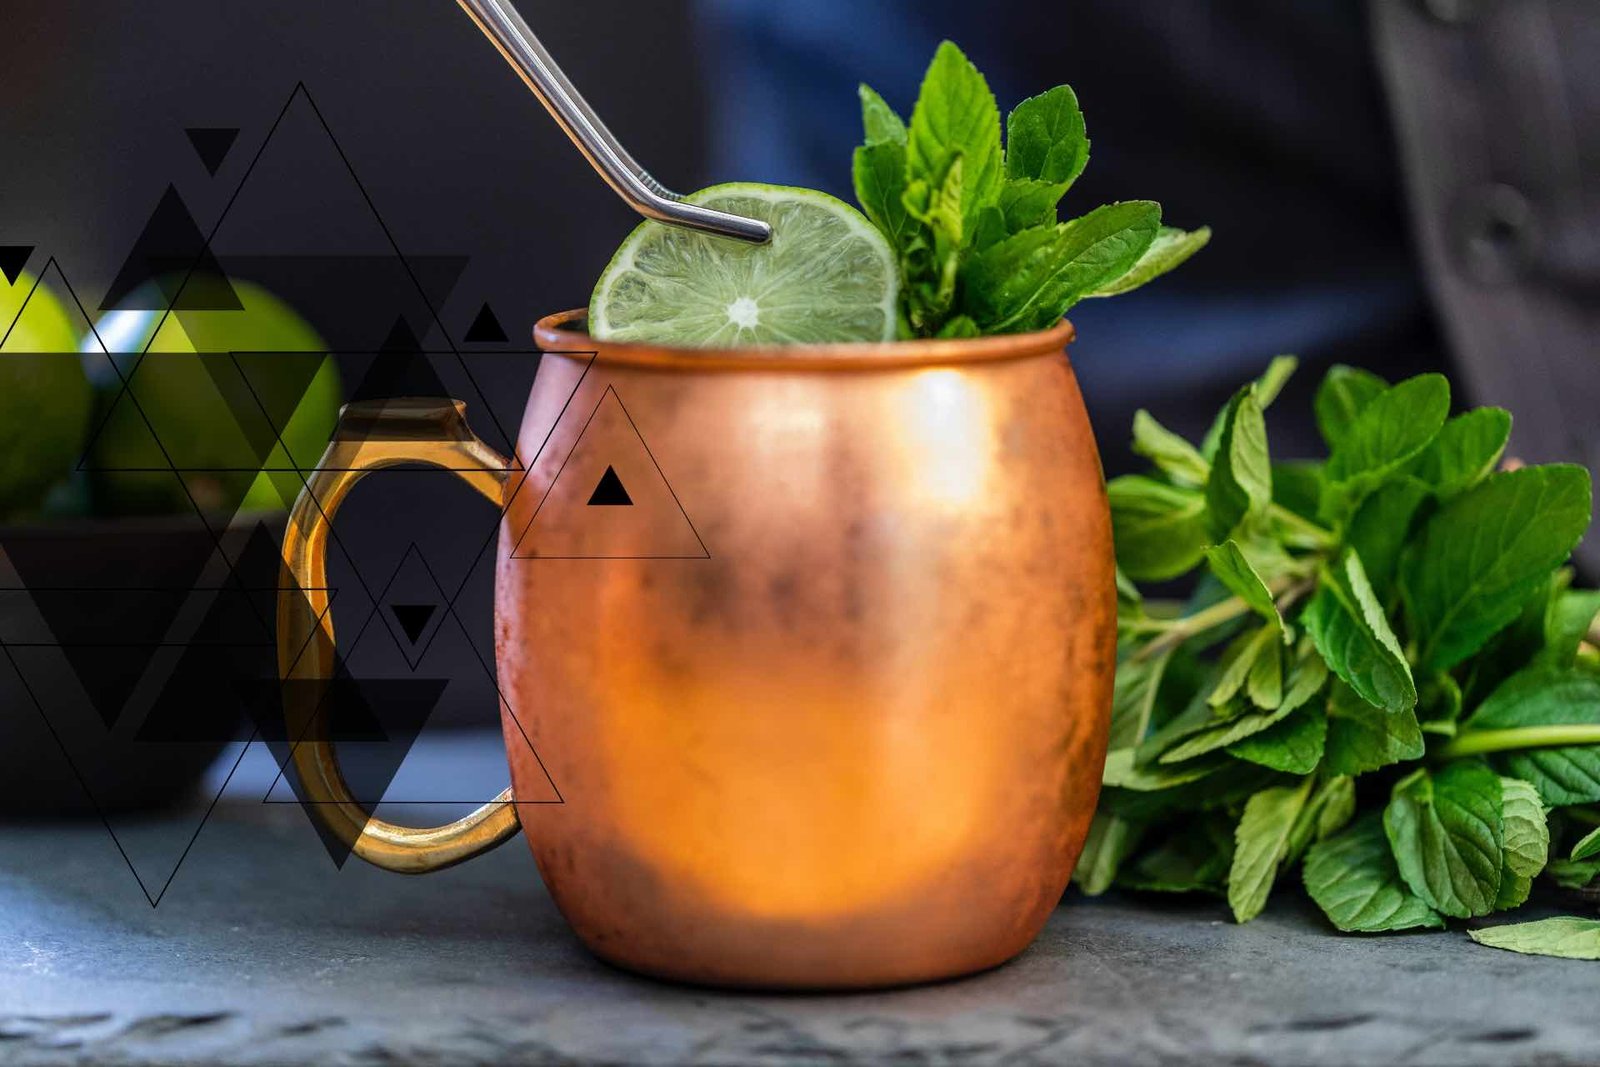 Moscow mule Cocktails.